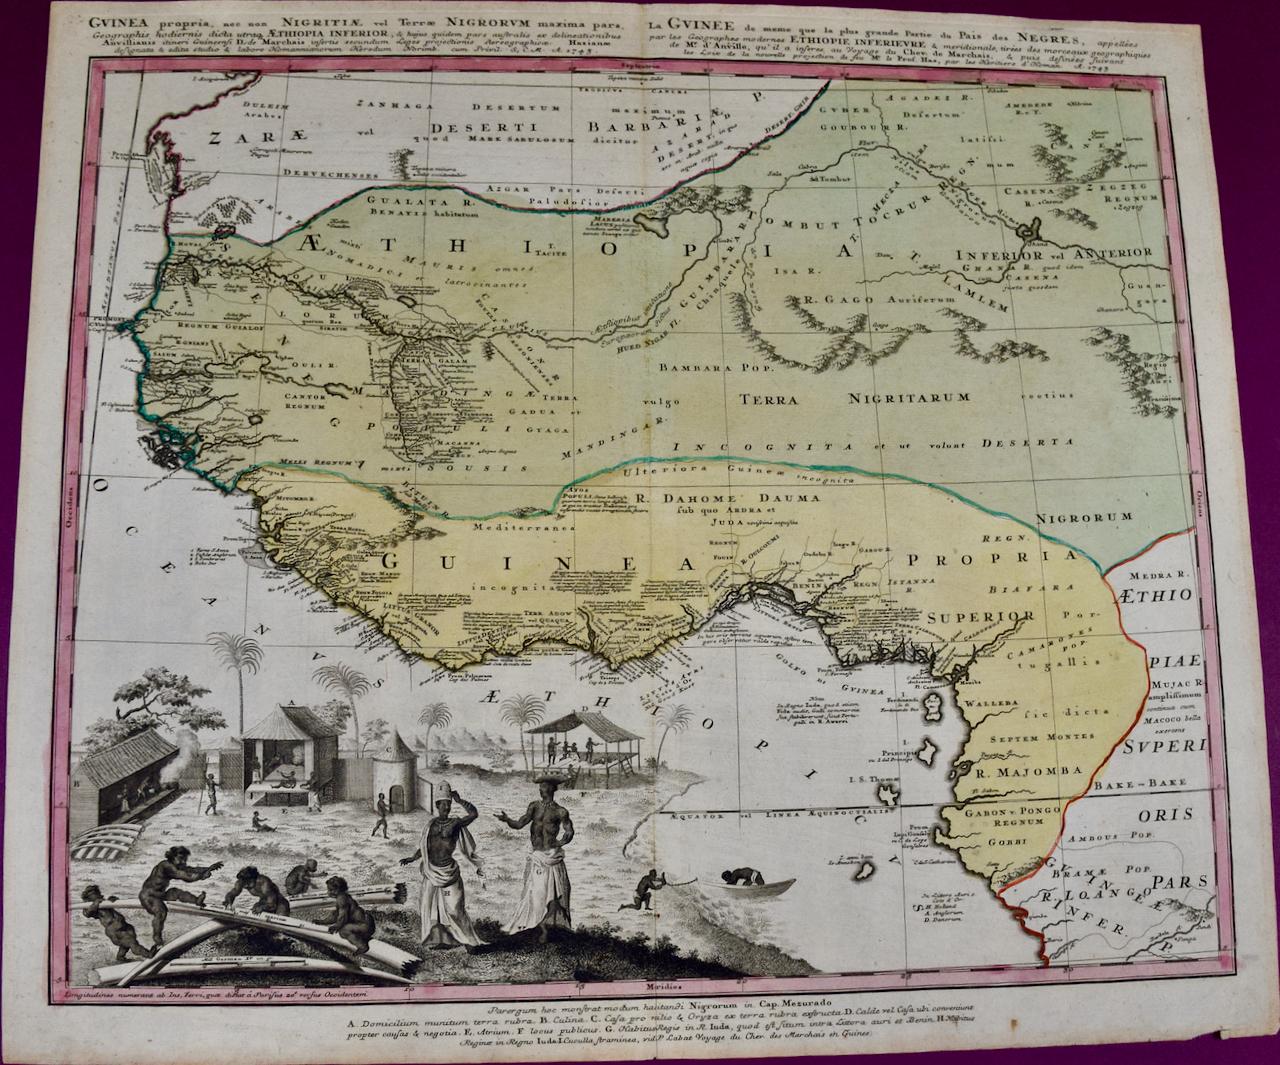 18th Century Hand-colored Homann Map of West Africa Entitled "Guinea Propria"